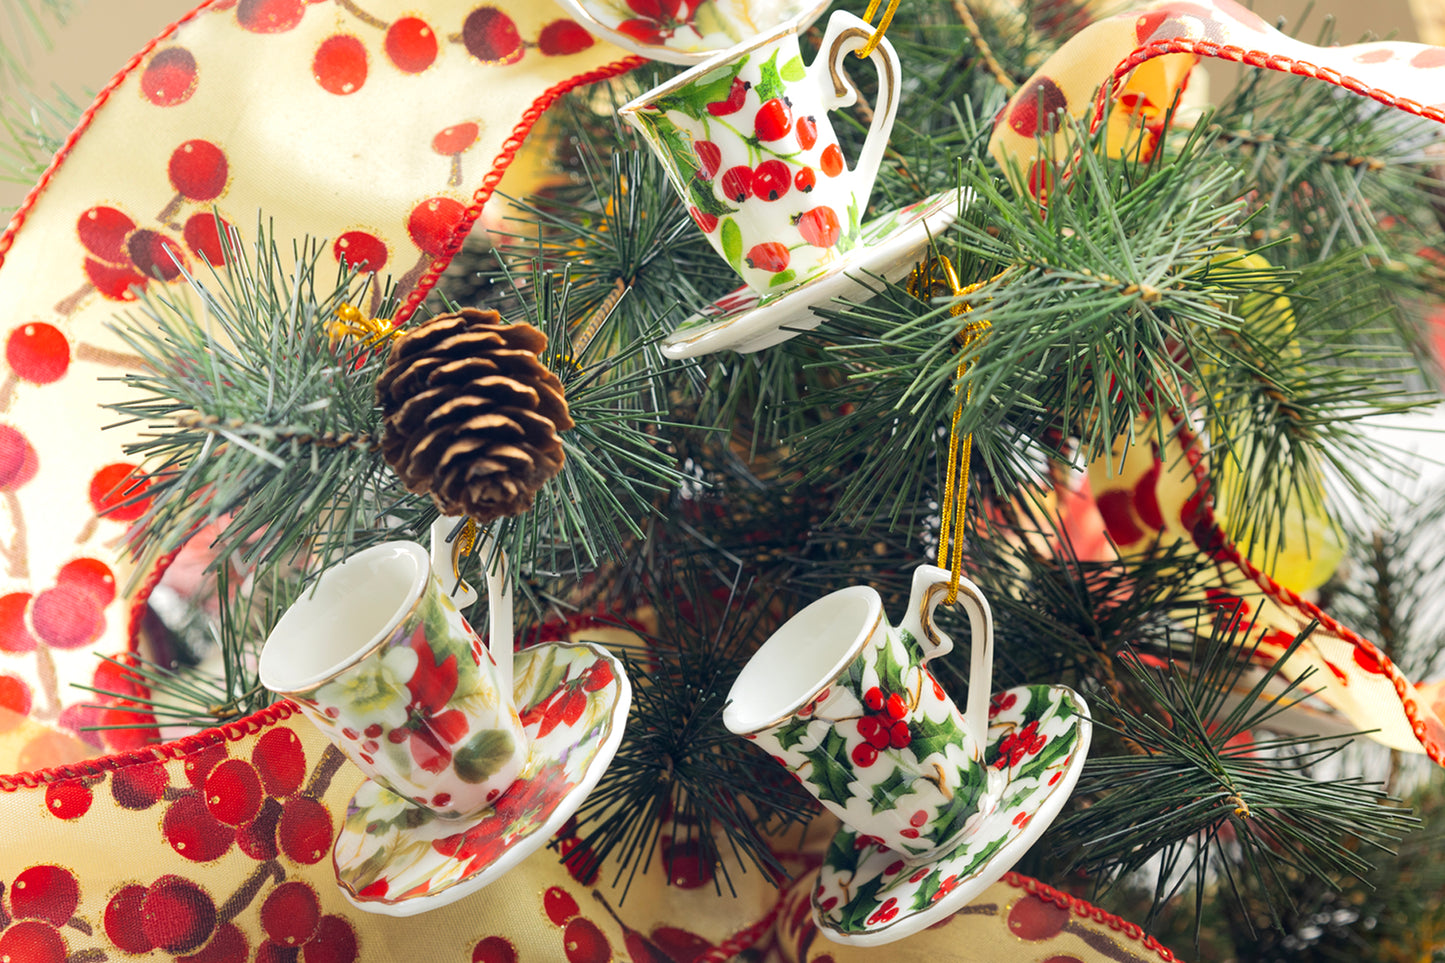 Grace Teaware Holly Berries and Poinsettia Assorted Mini Teacups Ornaments